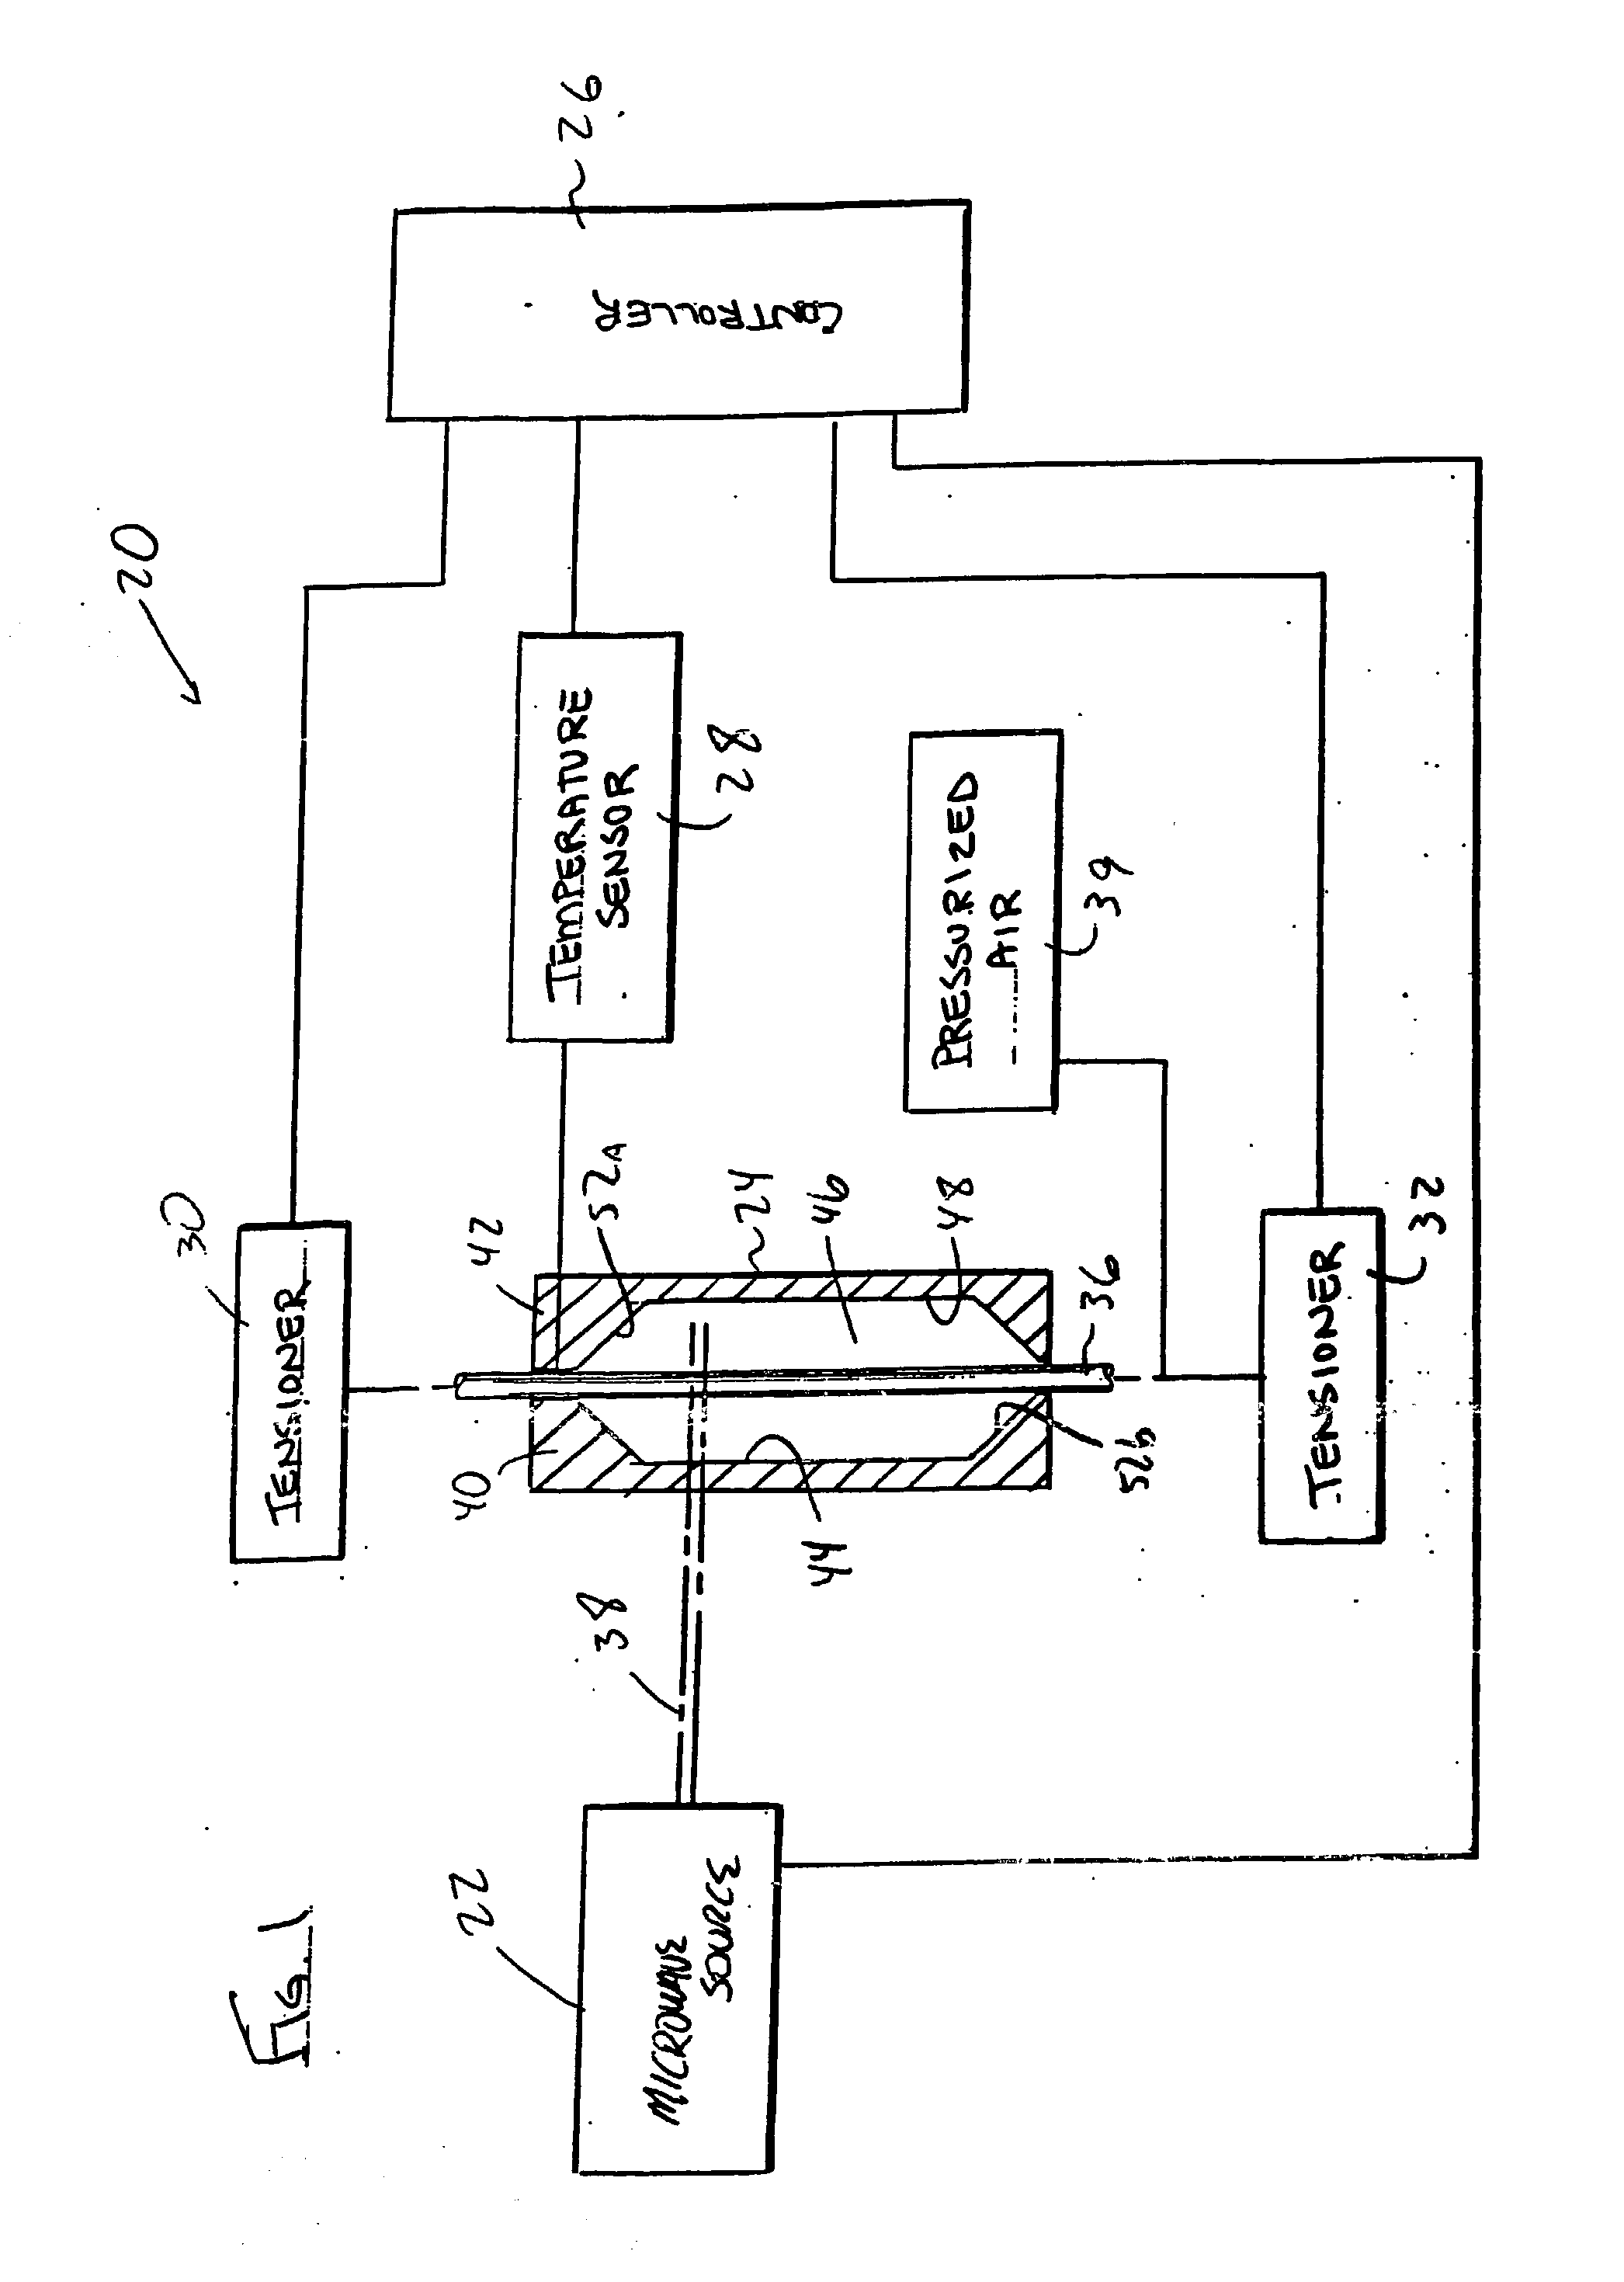 Method of manufacture medical devices employing microwave energy